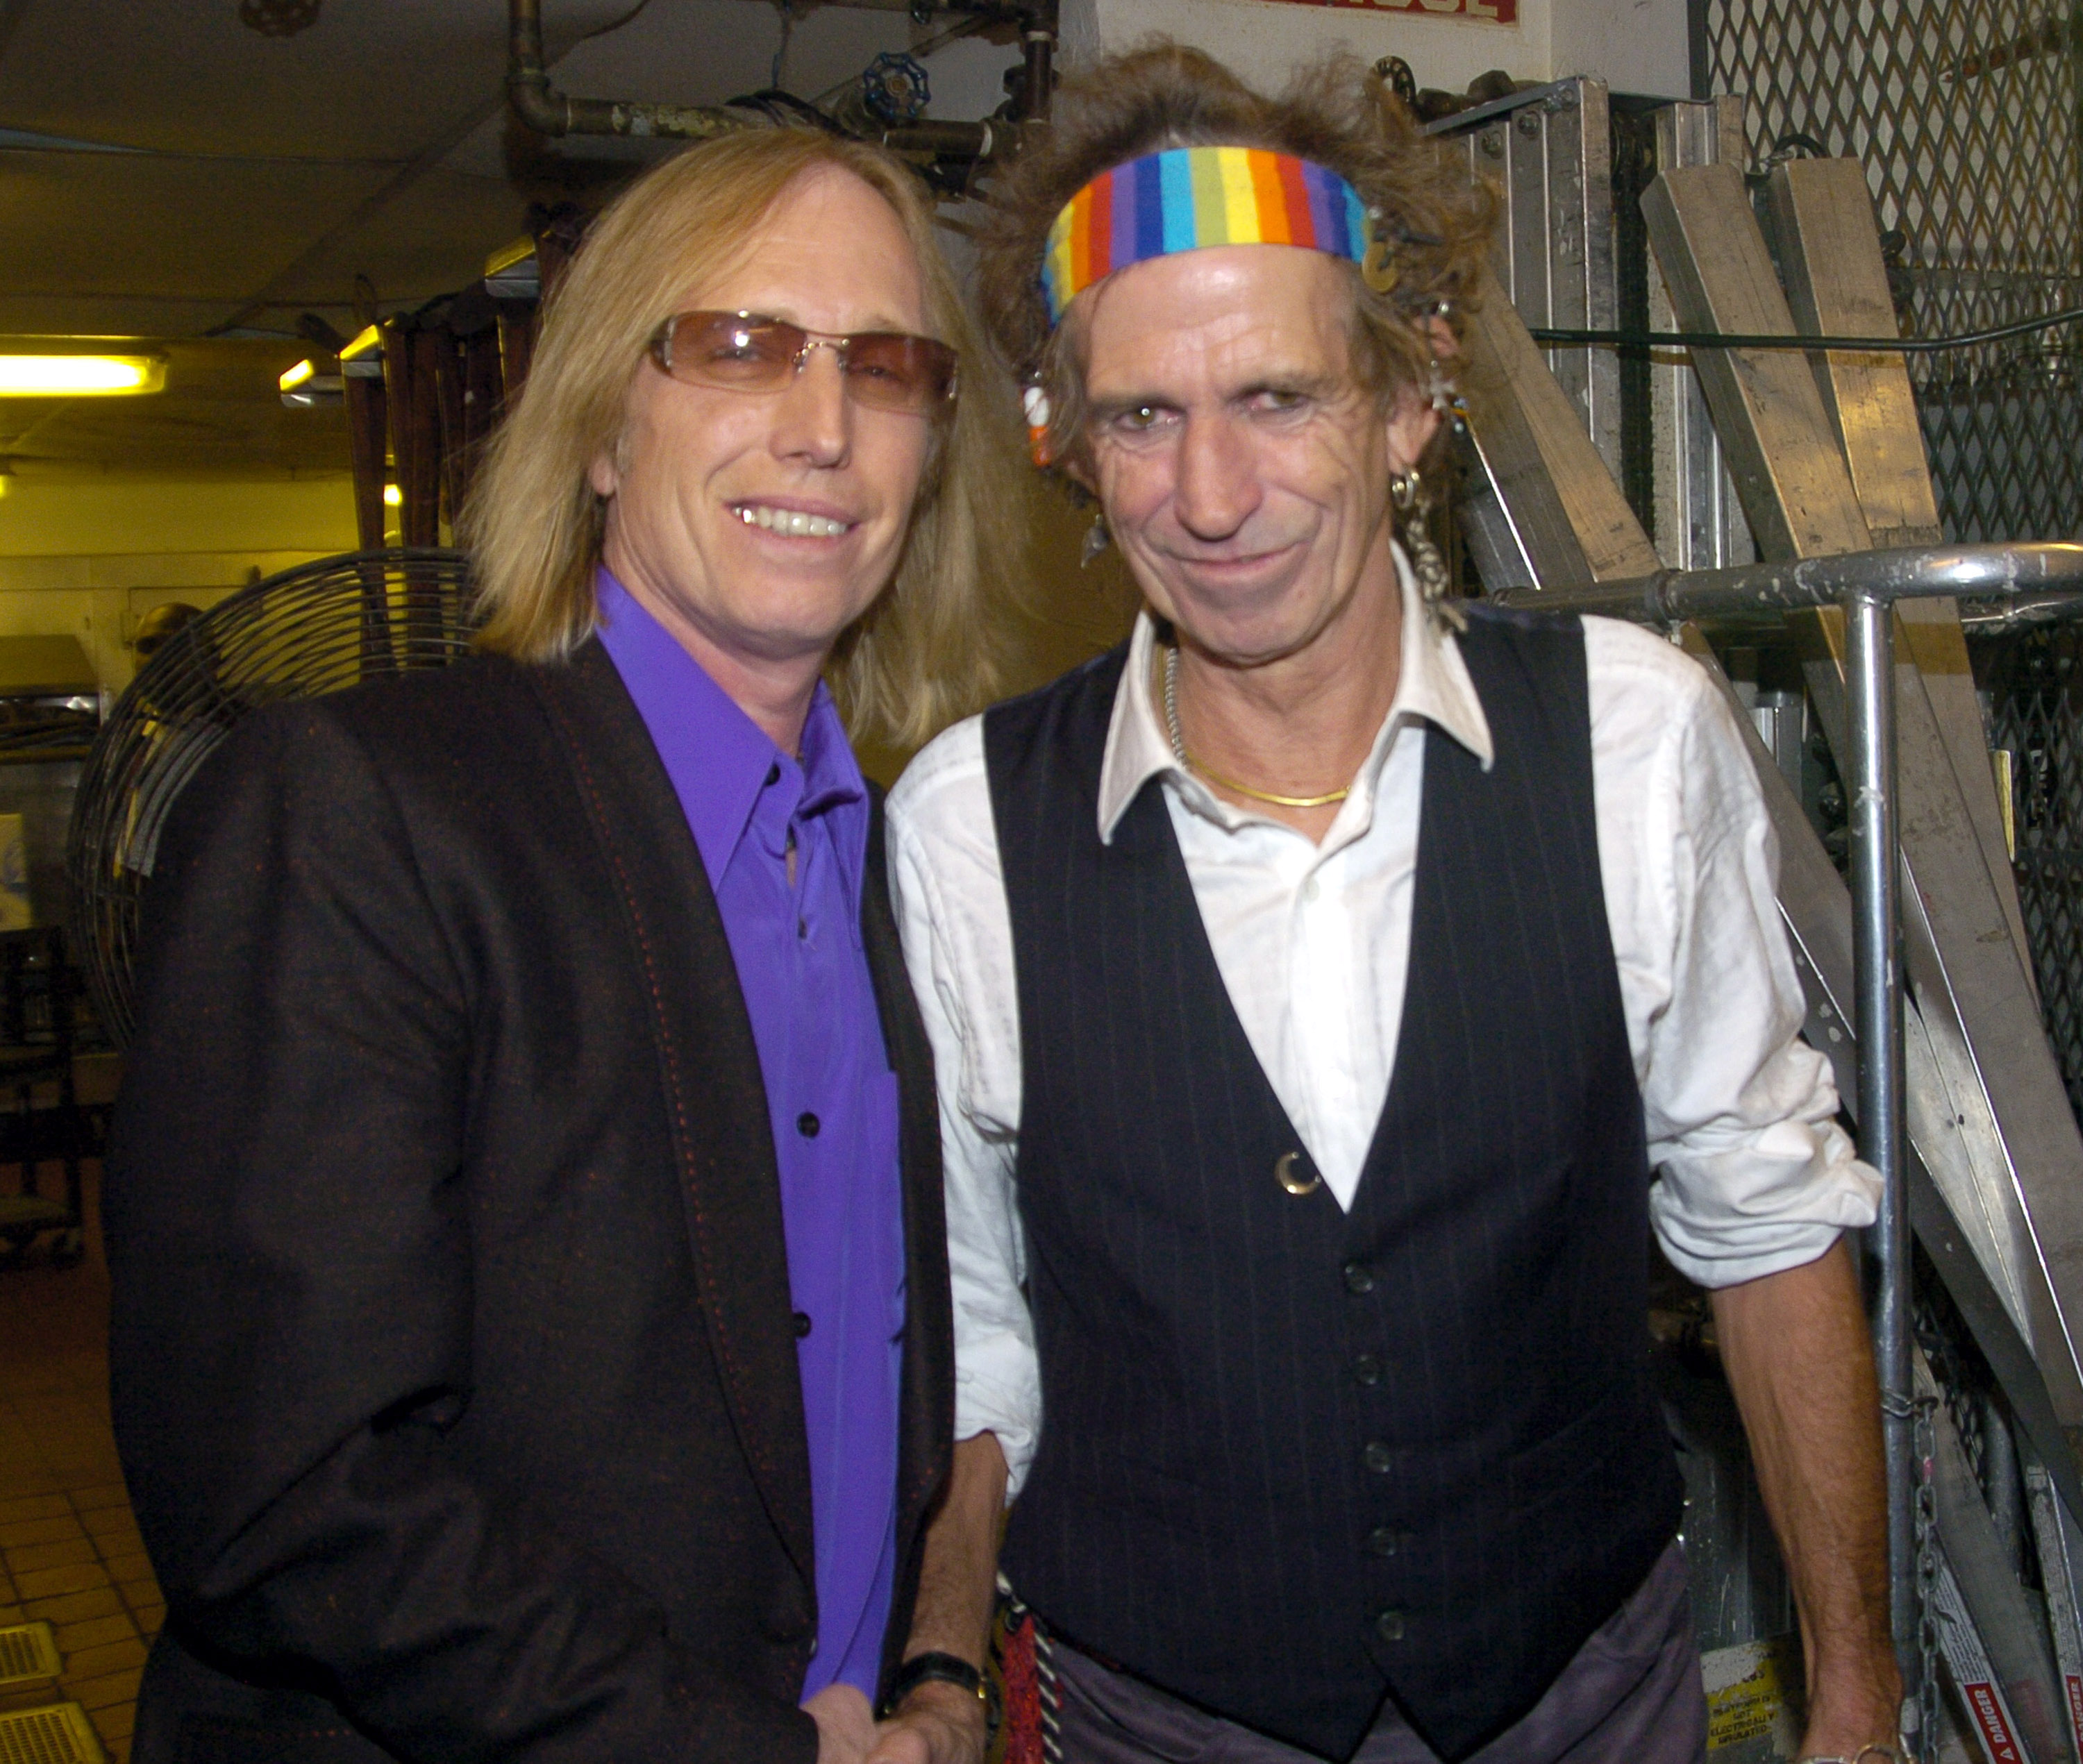 Tom Petty and Keith Richards pose together in a backstage space.